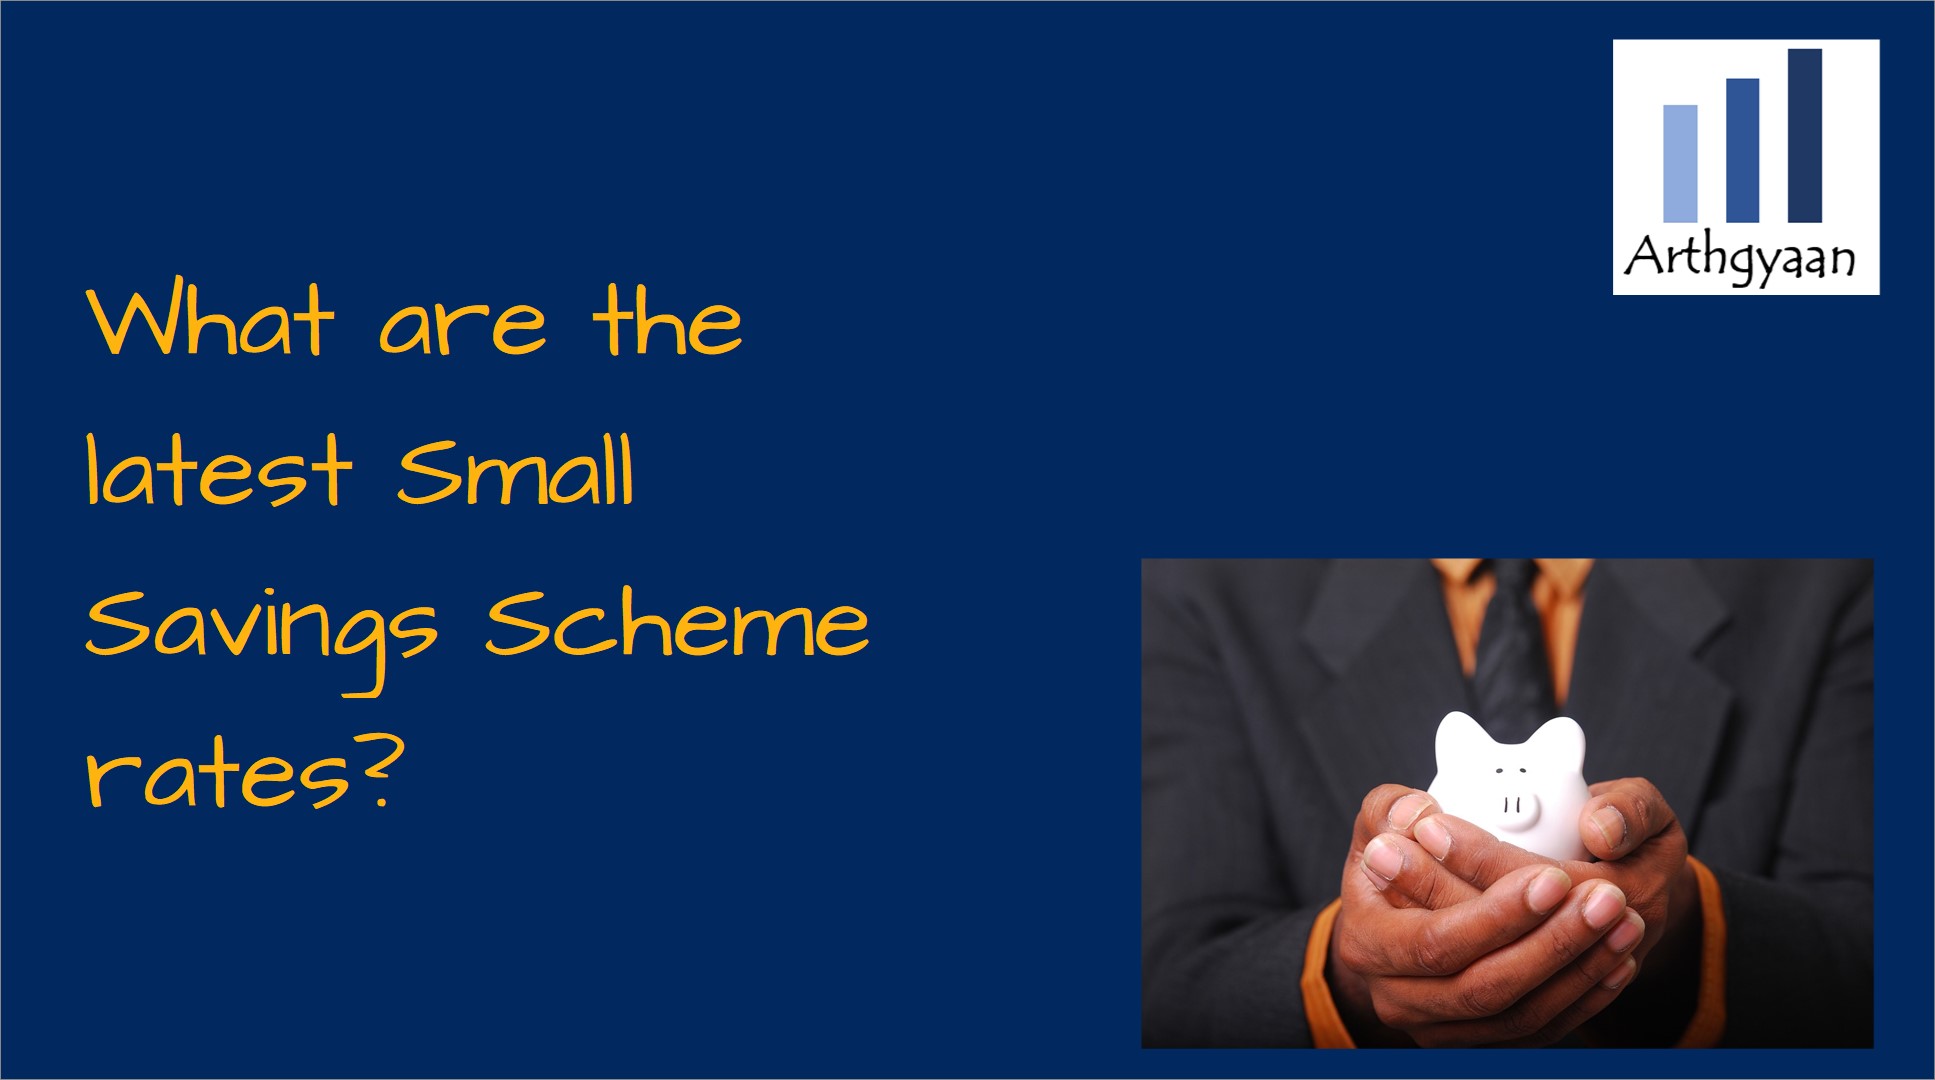 What are the latest Small Savings Scheme rates?